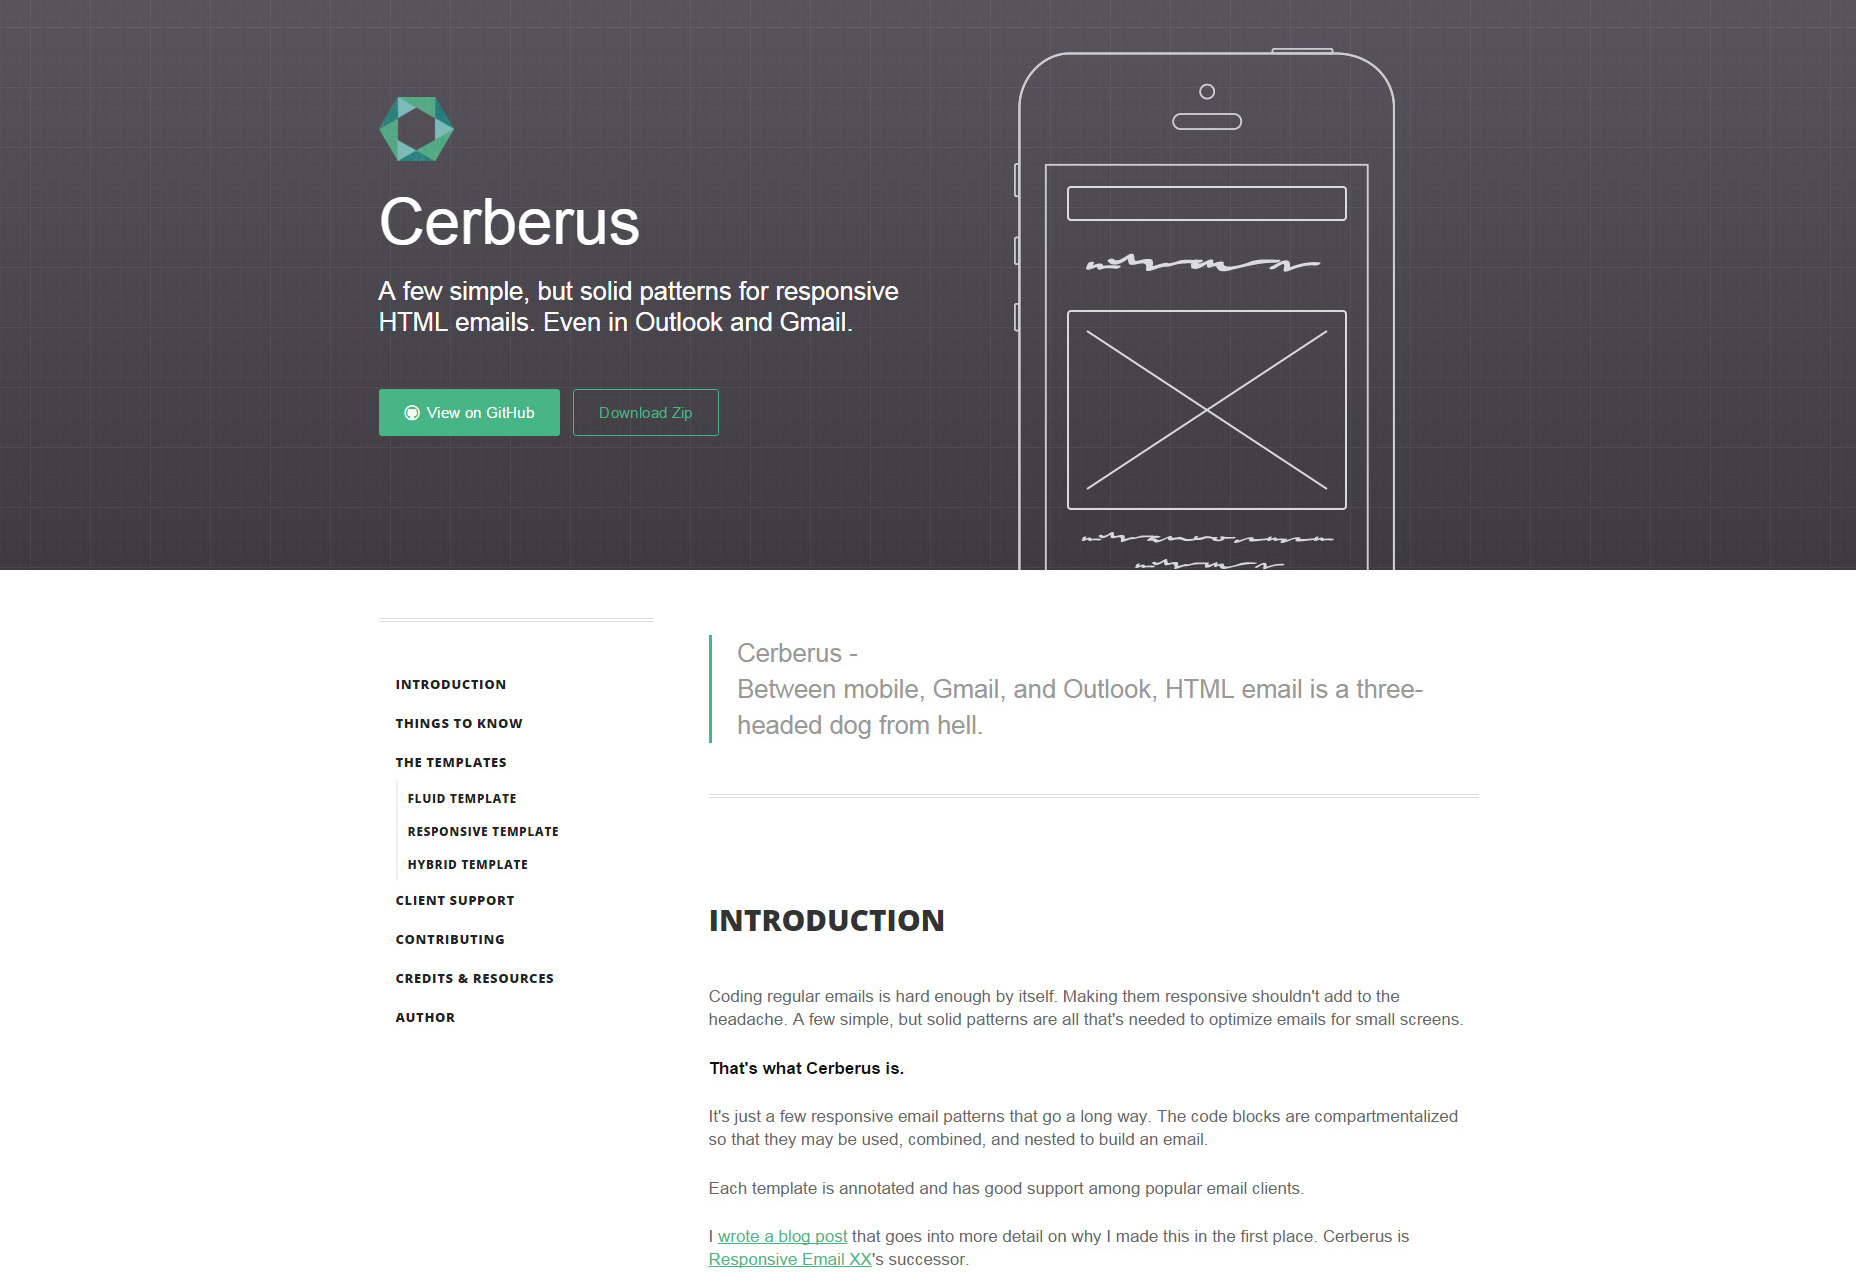 Cerberus: Patterns for Responsive HTML Email Templates